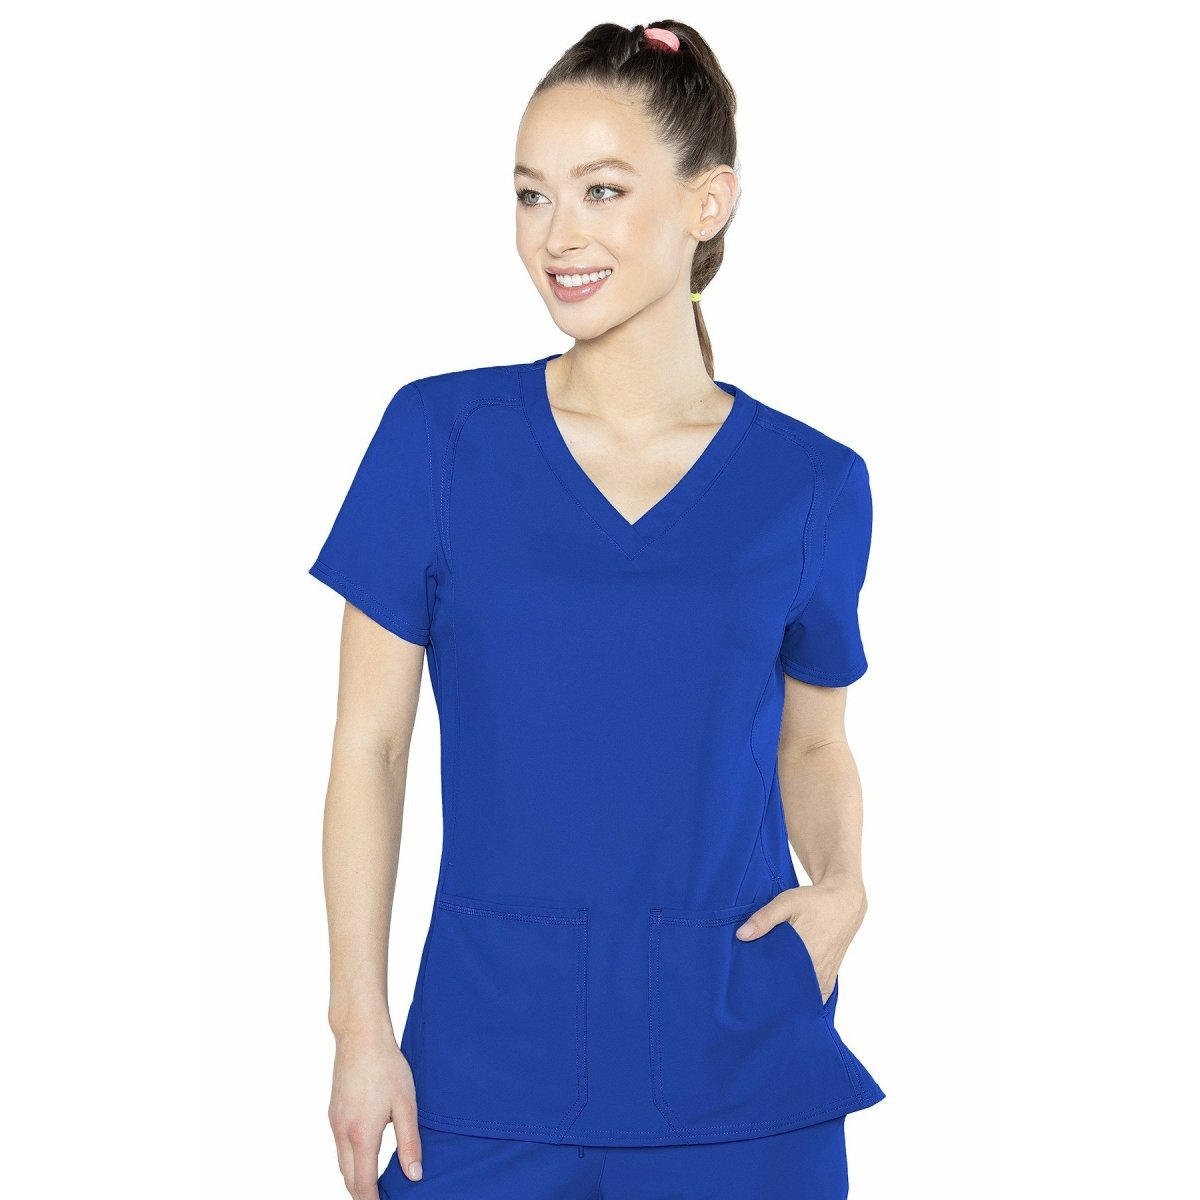 Med Couture Insight Side Pocket Top